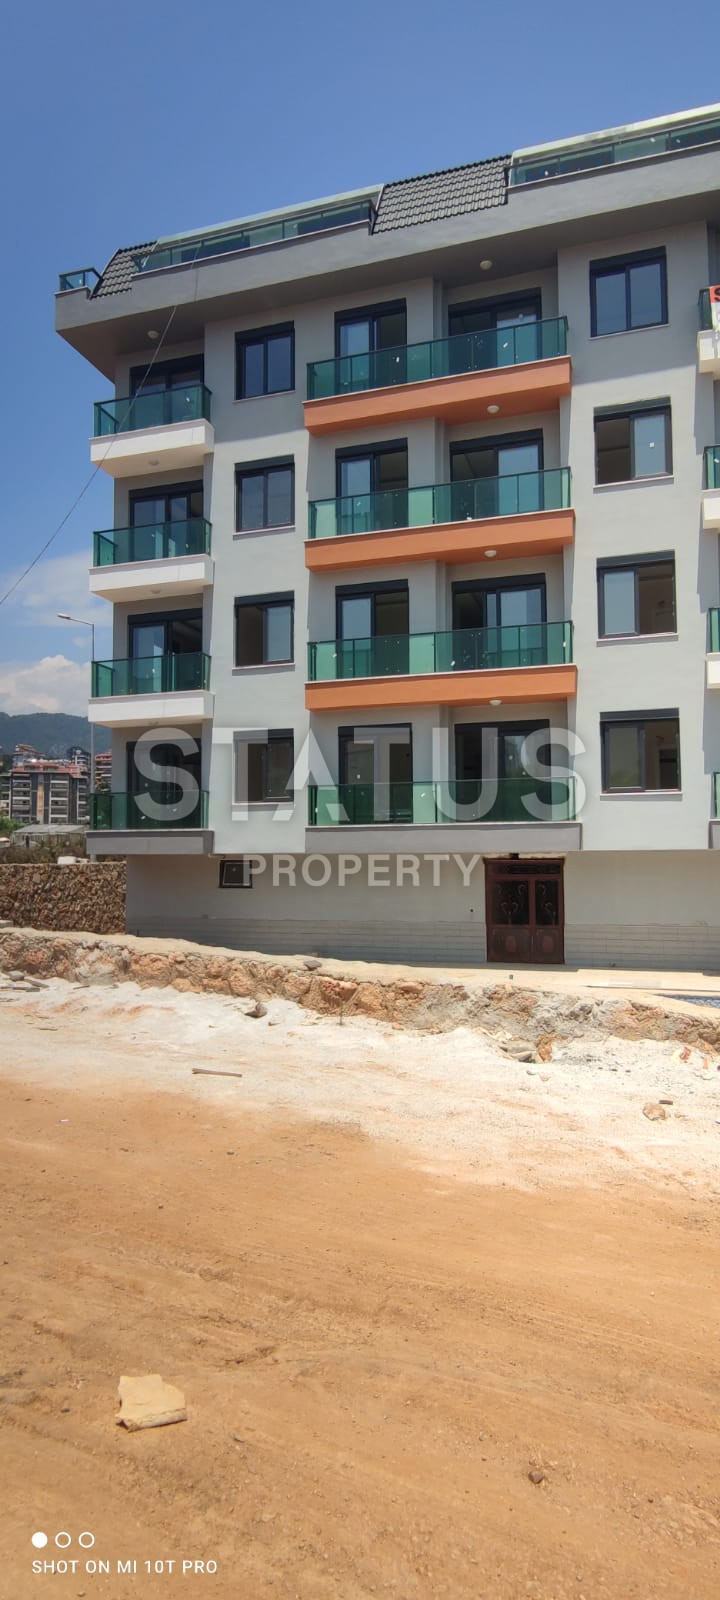 One-bedroom apartment at an attractive price in OBA. 55m2 фото 2